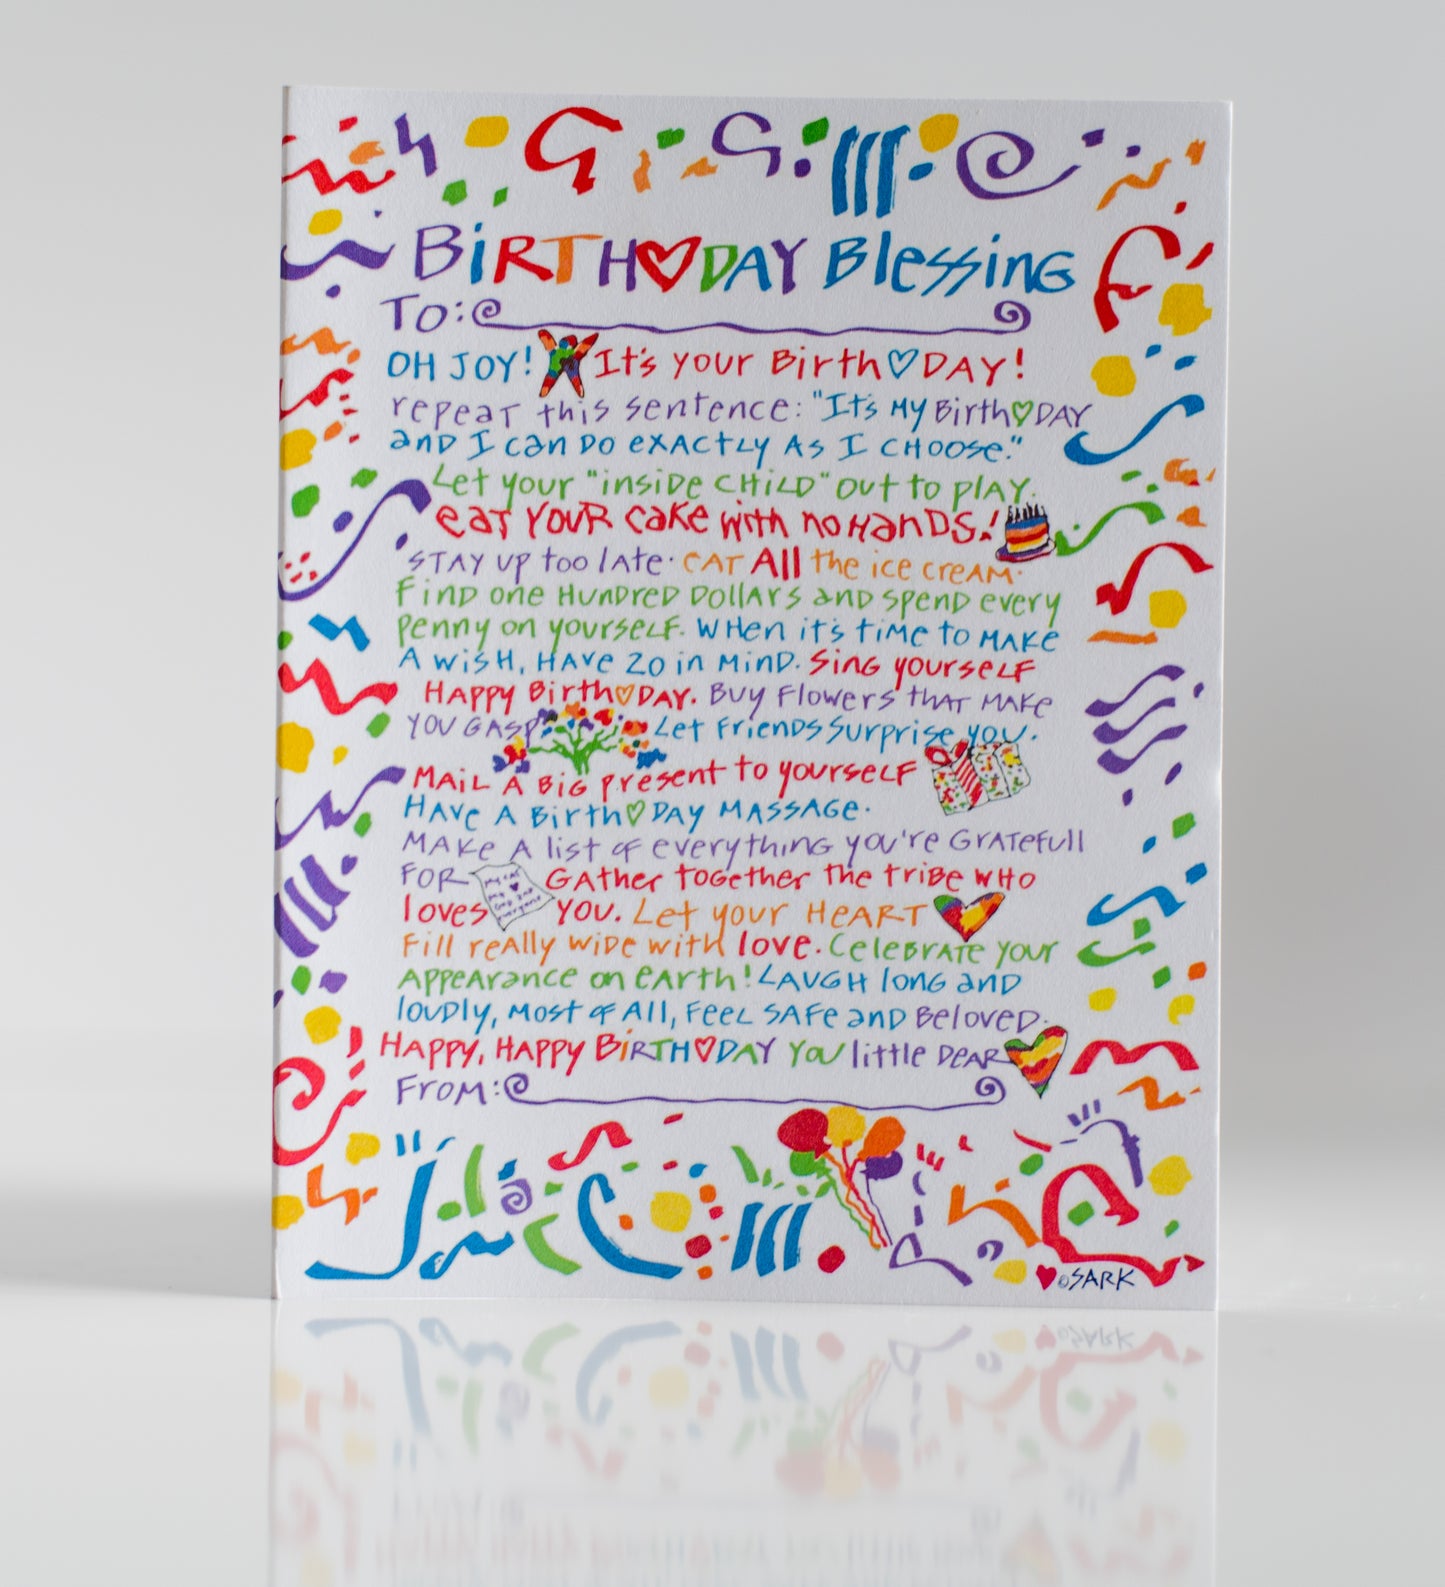 Birthday Blessings, SARK Greeting Cards (Set of 8)